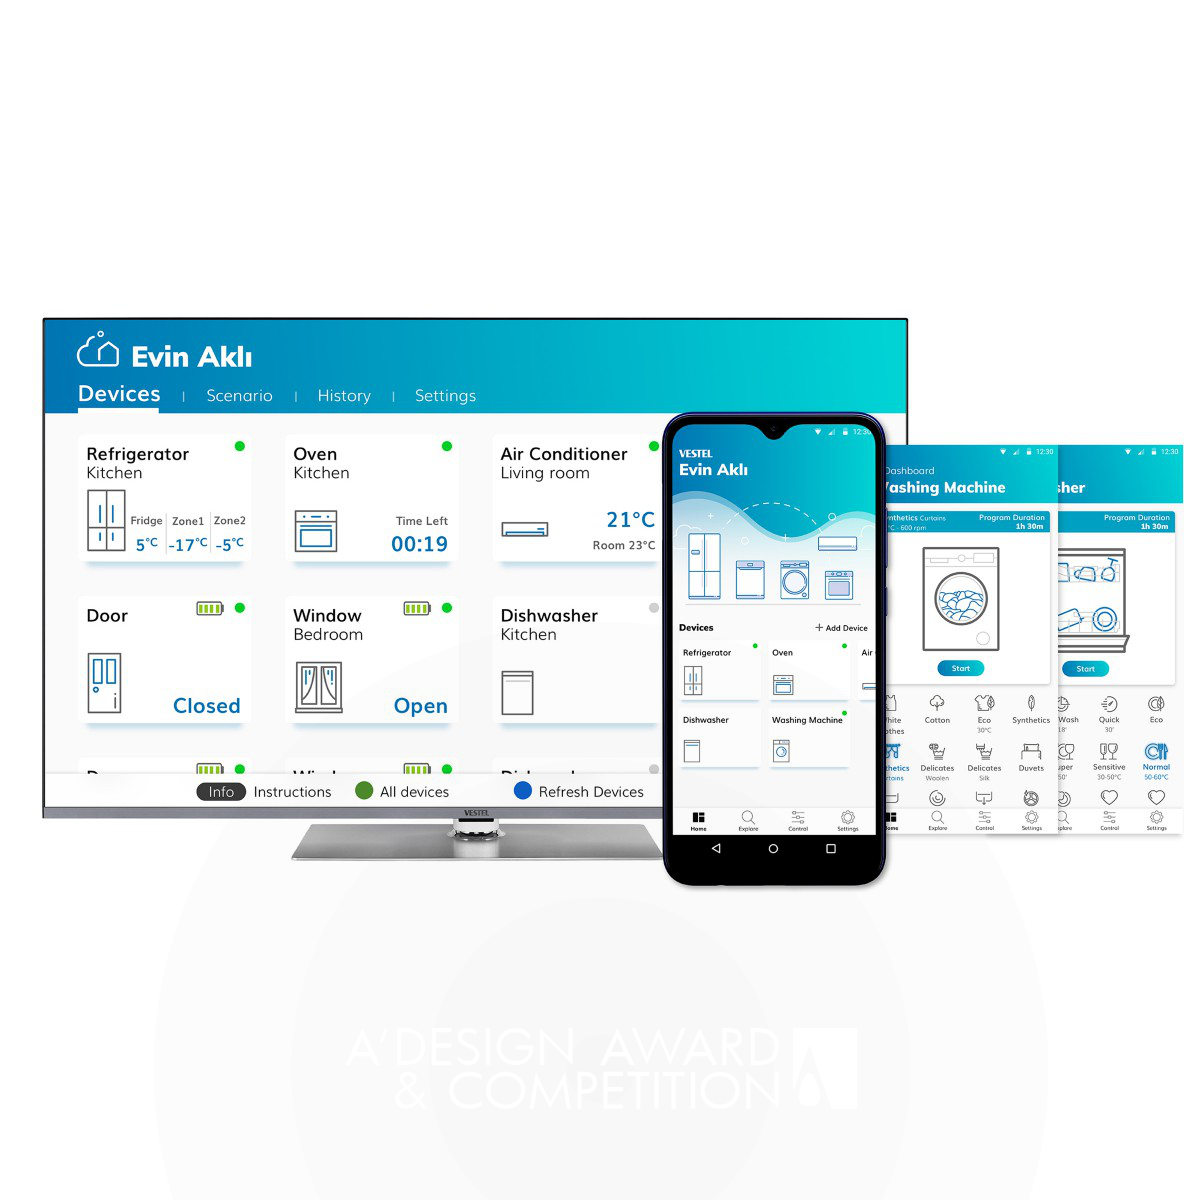 Vestel Evin Akli Smart Home Mobile Application by Vestel UX and UI Design Group Silver Interface, Interaction and User Experience Design Award Winner 2021 